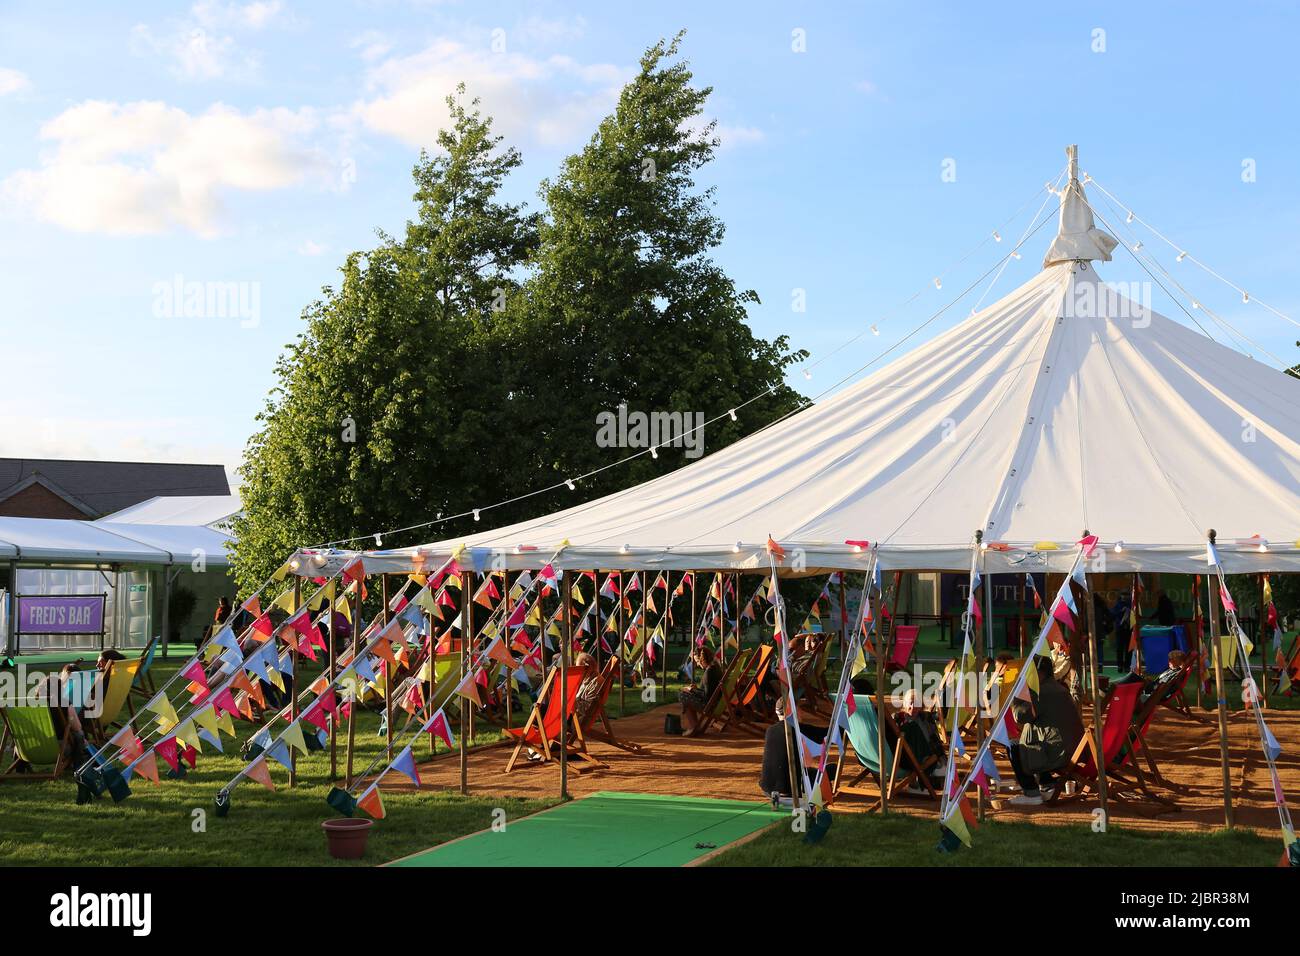 Last of the sun at the Main Garden Tent, Hay Festival 2022, Hay-on-Wye, Brecknockshire, Powys, Wales, Great Britain, United Kingdom, UK, Europe Stock Photo